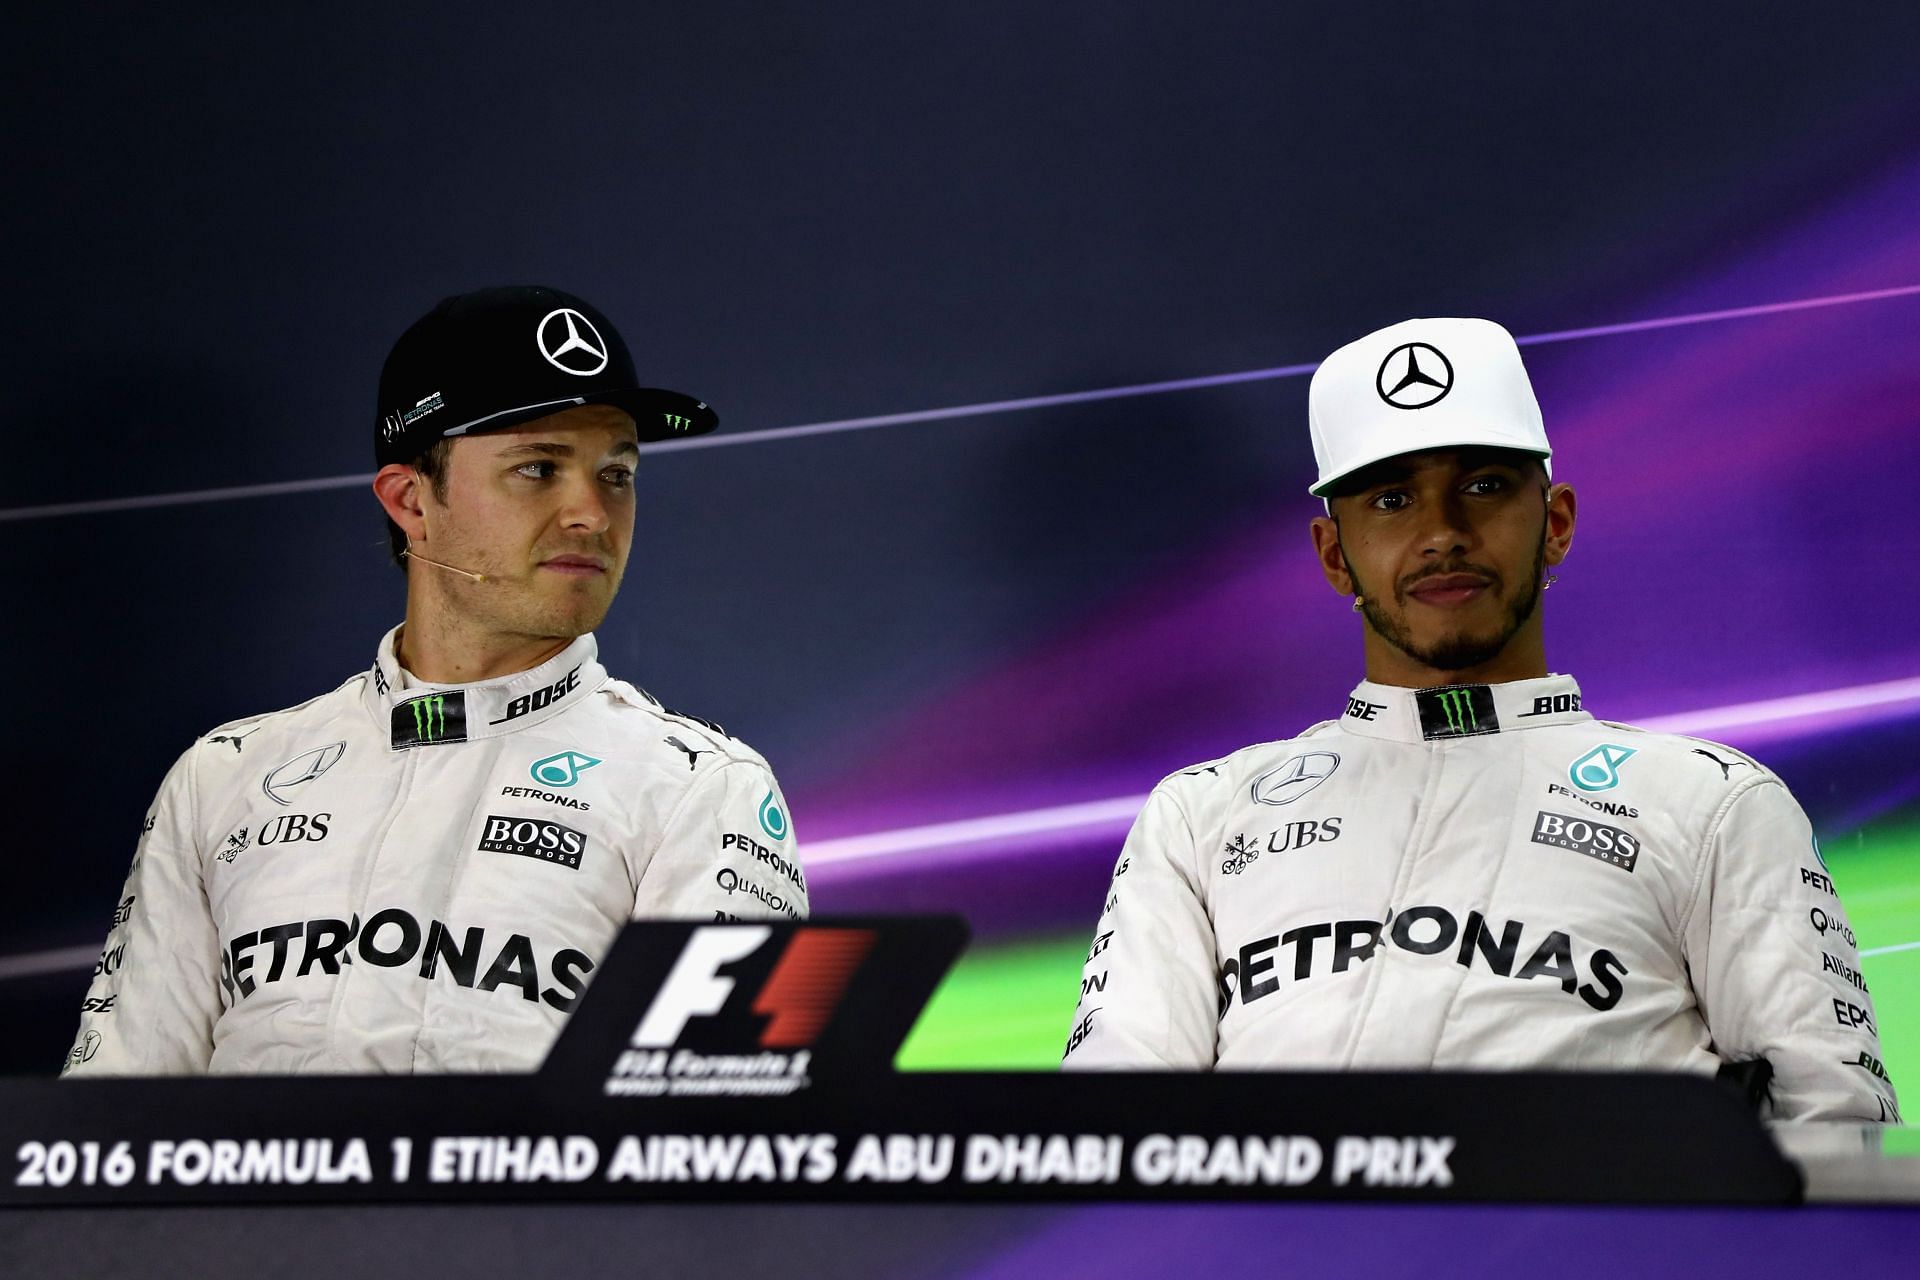 Nico Rosberg (left) and Lewis Hamilton (right) partnered at Mercedes between 2013 and 2016